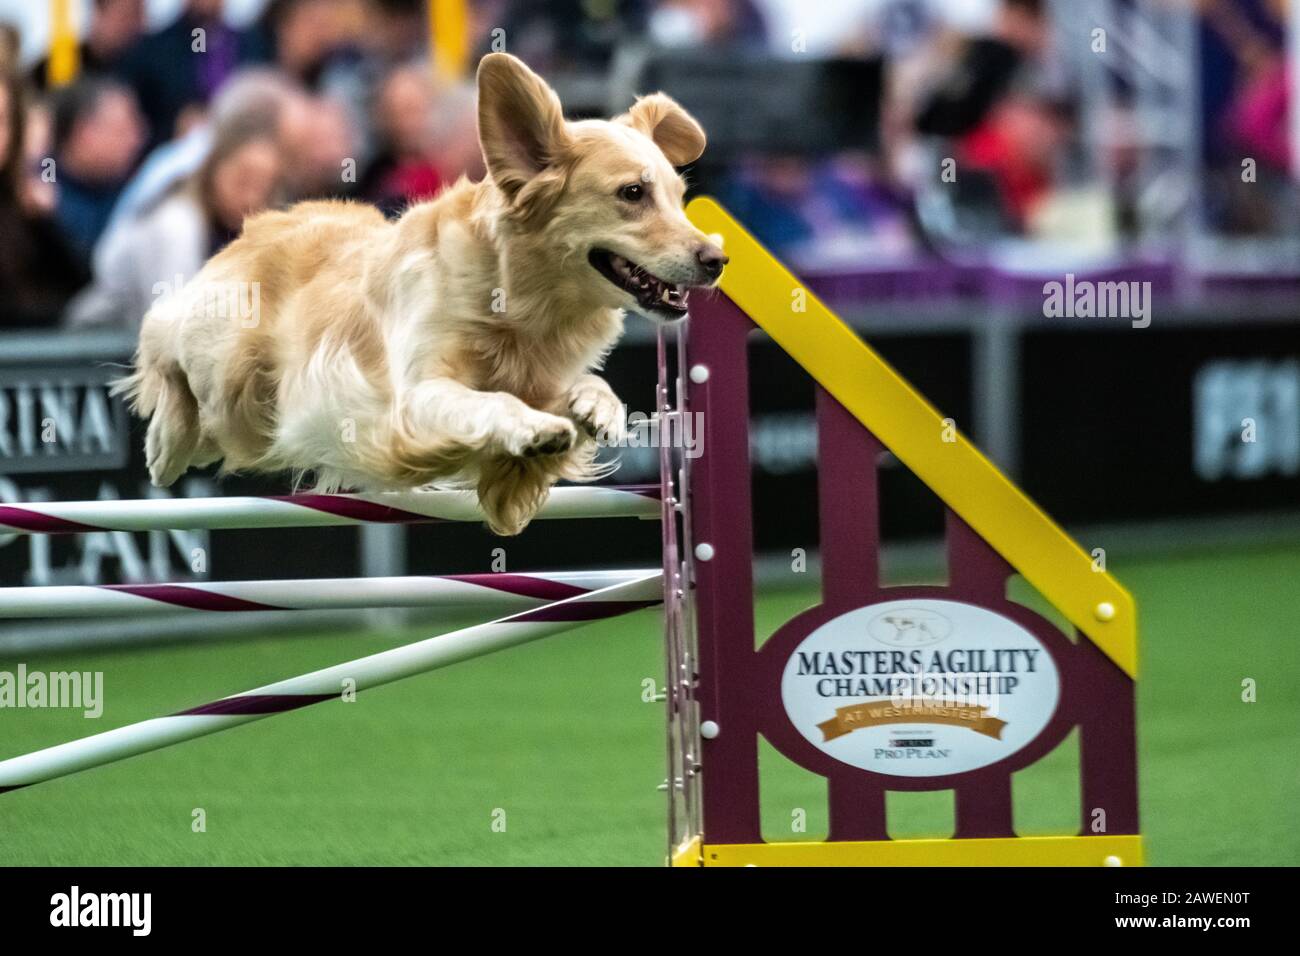 New York, USA. 8th Feb, 2020. Jet, a Golden Retriever, clears an obstacle during the qualifying round of The Westminster Kennel Club Dog show Masters Agility Championship in New York city. Credit: Enrique Shore/Alamy Live News Stock Photo